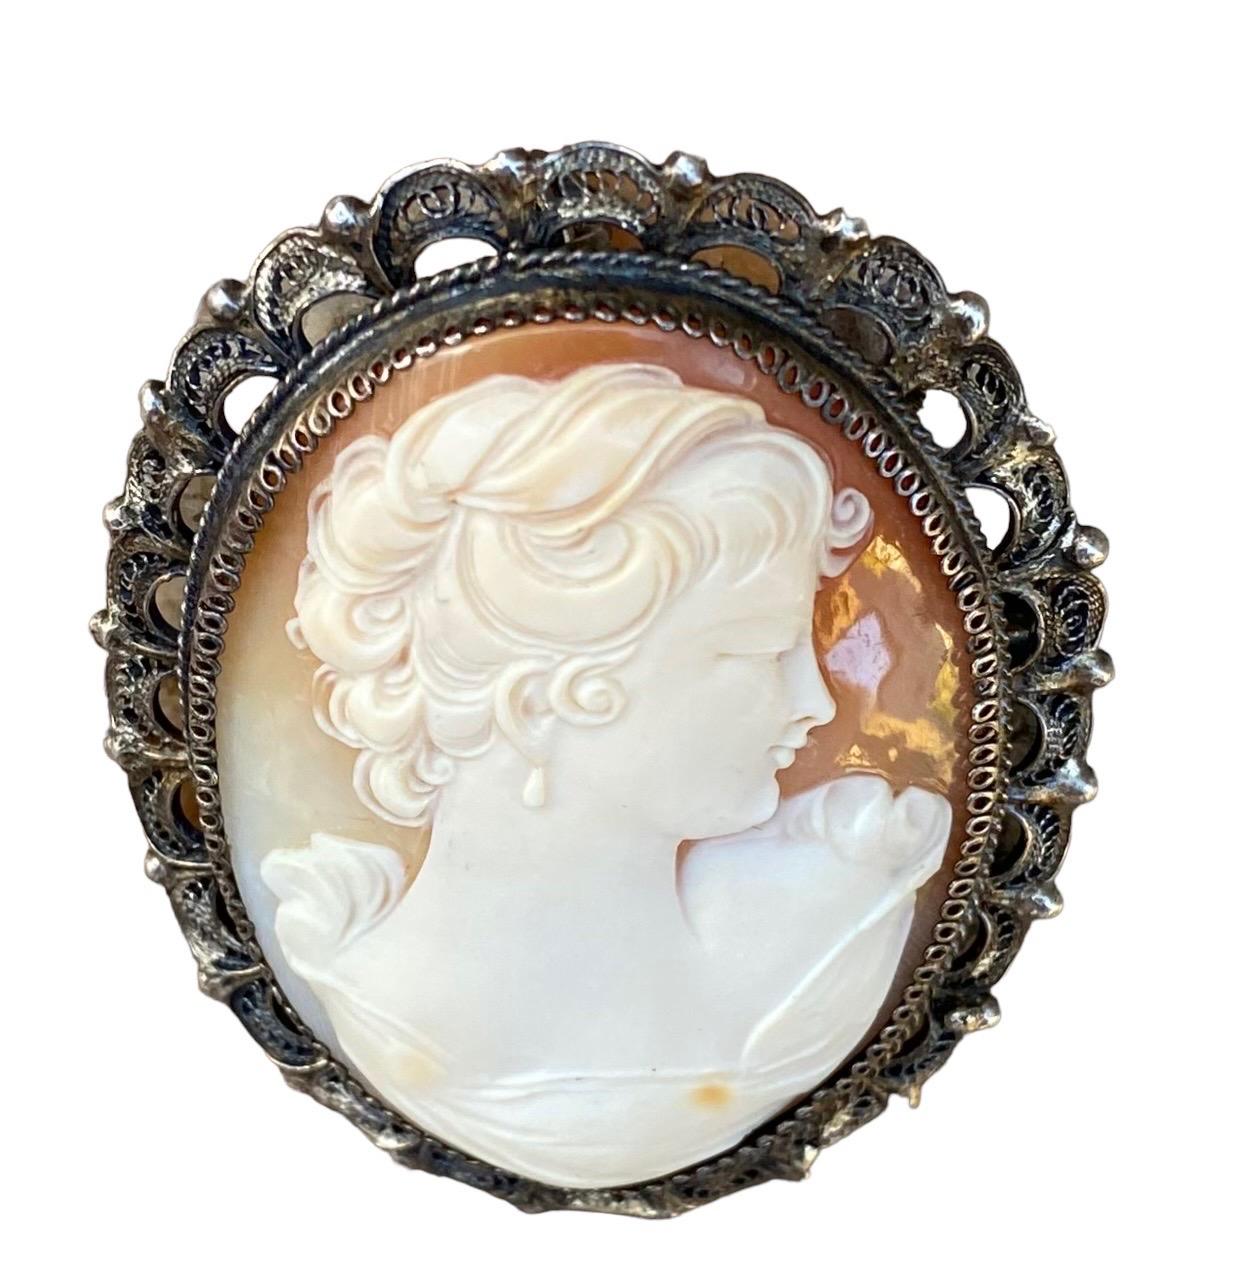 An antique late 19th c. Italian beautifully detailed and hand carved shell cameo brooch/pendant mounted in a .800 silver filigree setting. Carved in deep relief with fine details.   